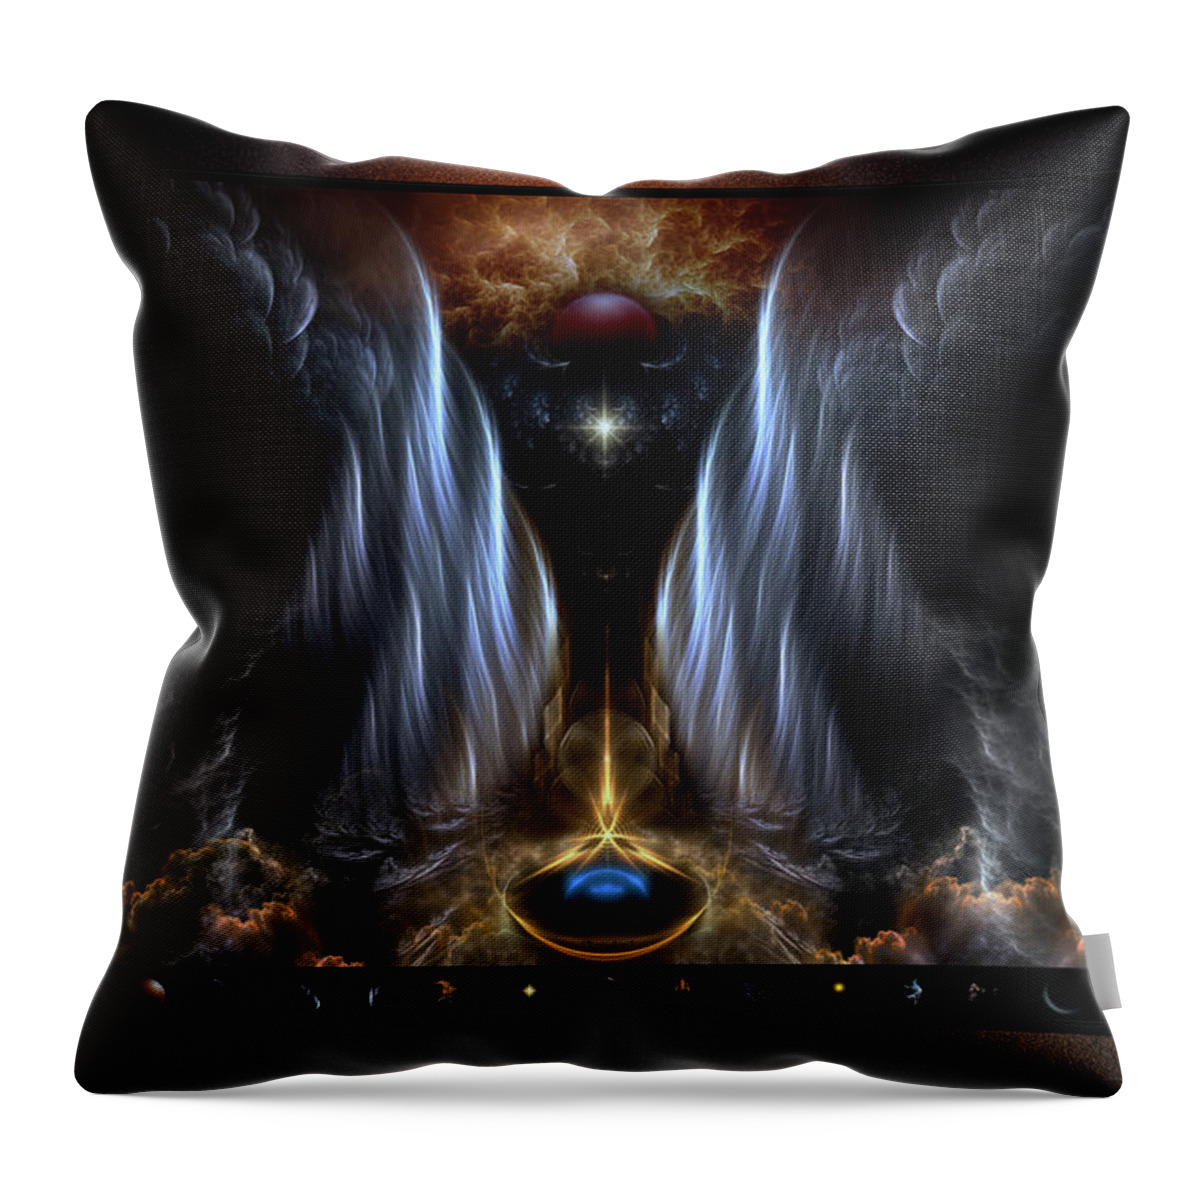 Dream Of Sages Throw Pillow featuring the digital art Dream Of Sages Fractal Art Composition by Rolando Burbon